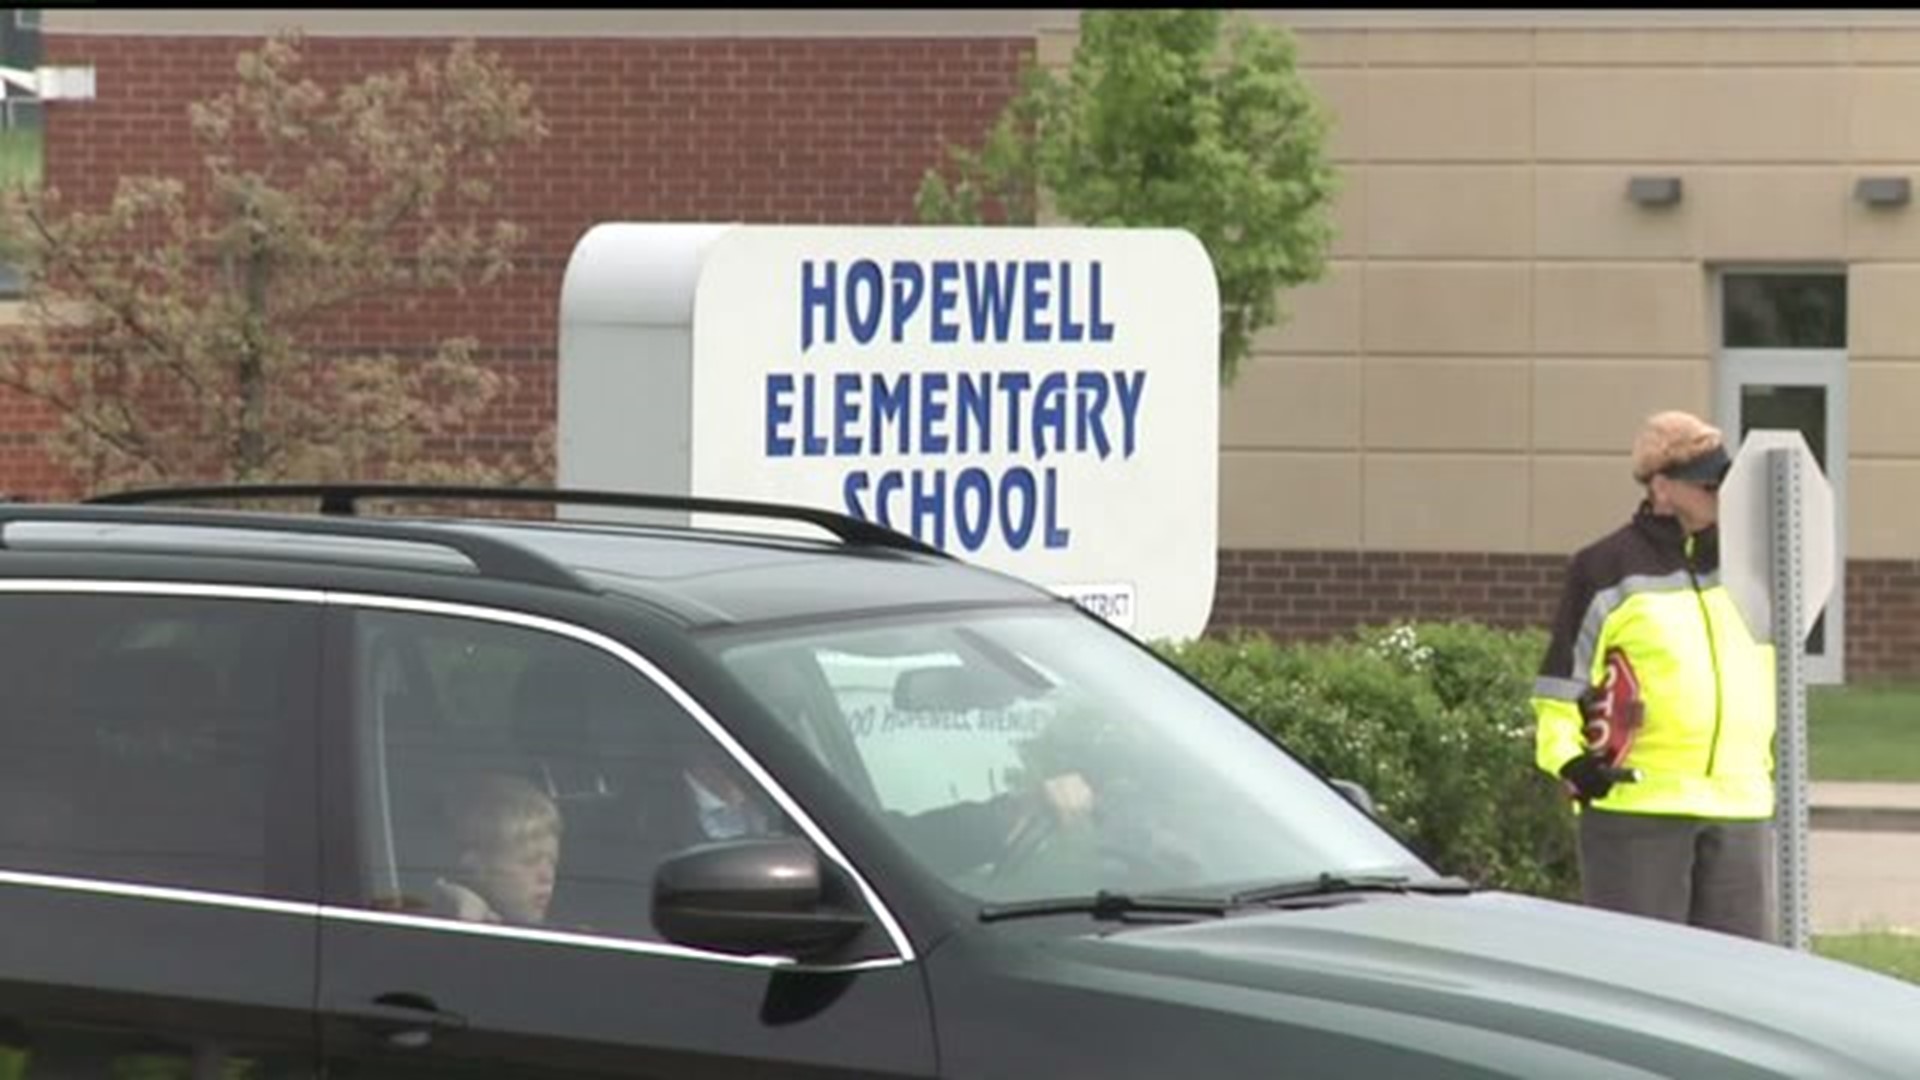 Stranger approaches student at Hopewell Elementary